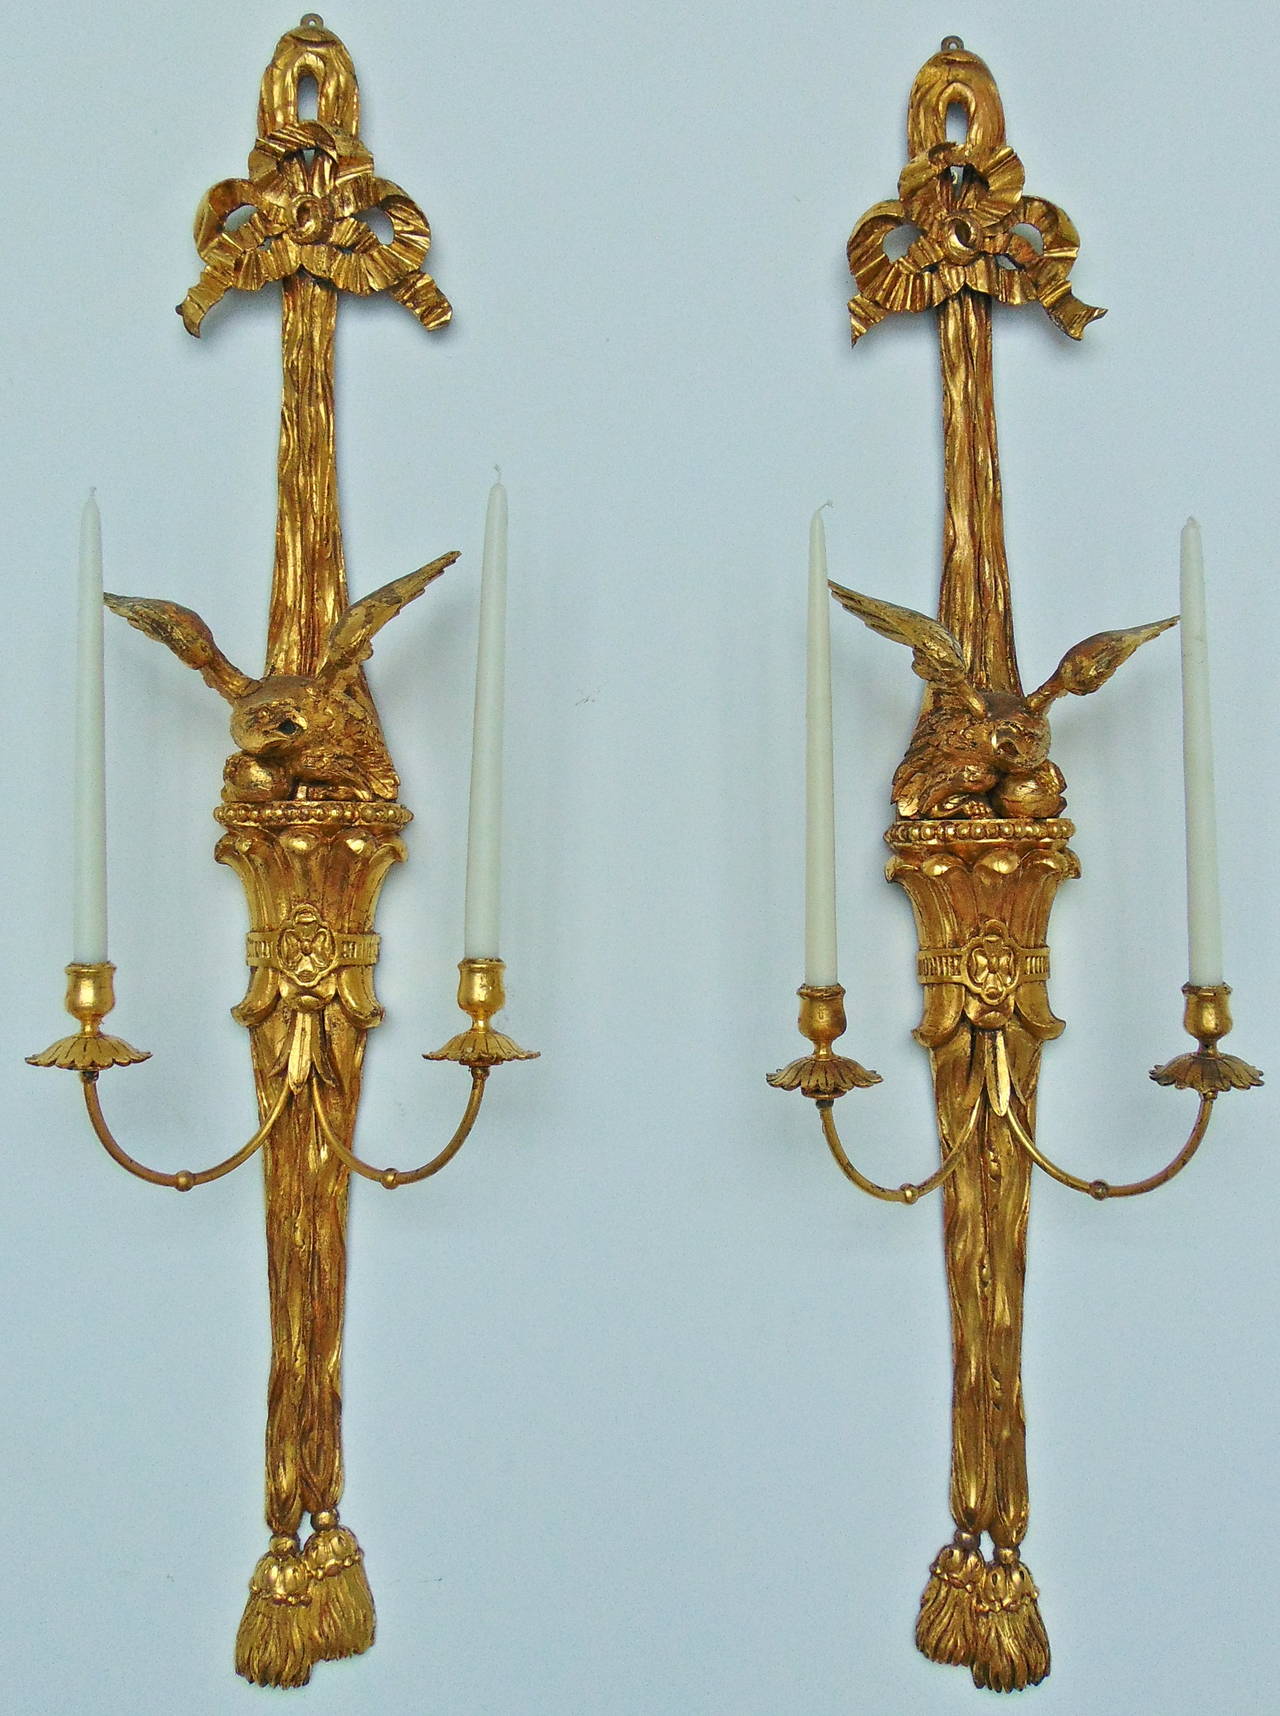 Pair of Georgian or Federal style giltwood eagle sconces.

--Realistically carved two-arm sconces.
--Eagle and fabric swag in neoclassical form.